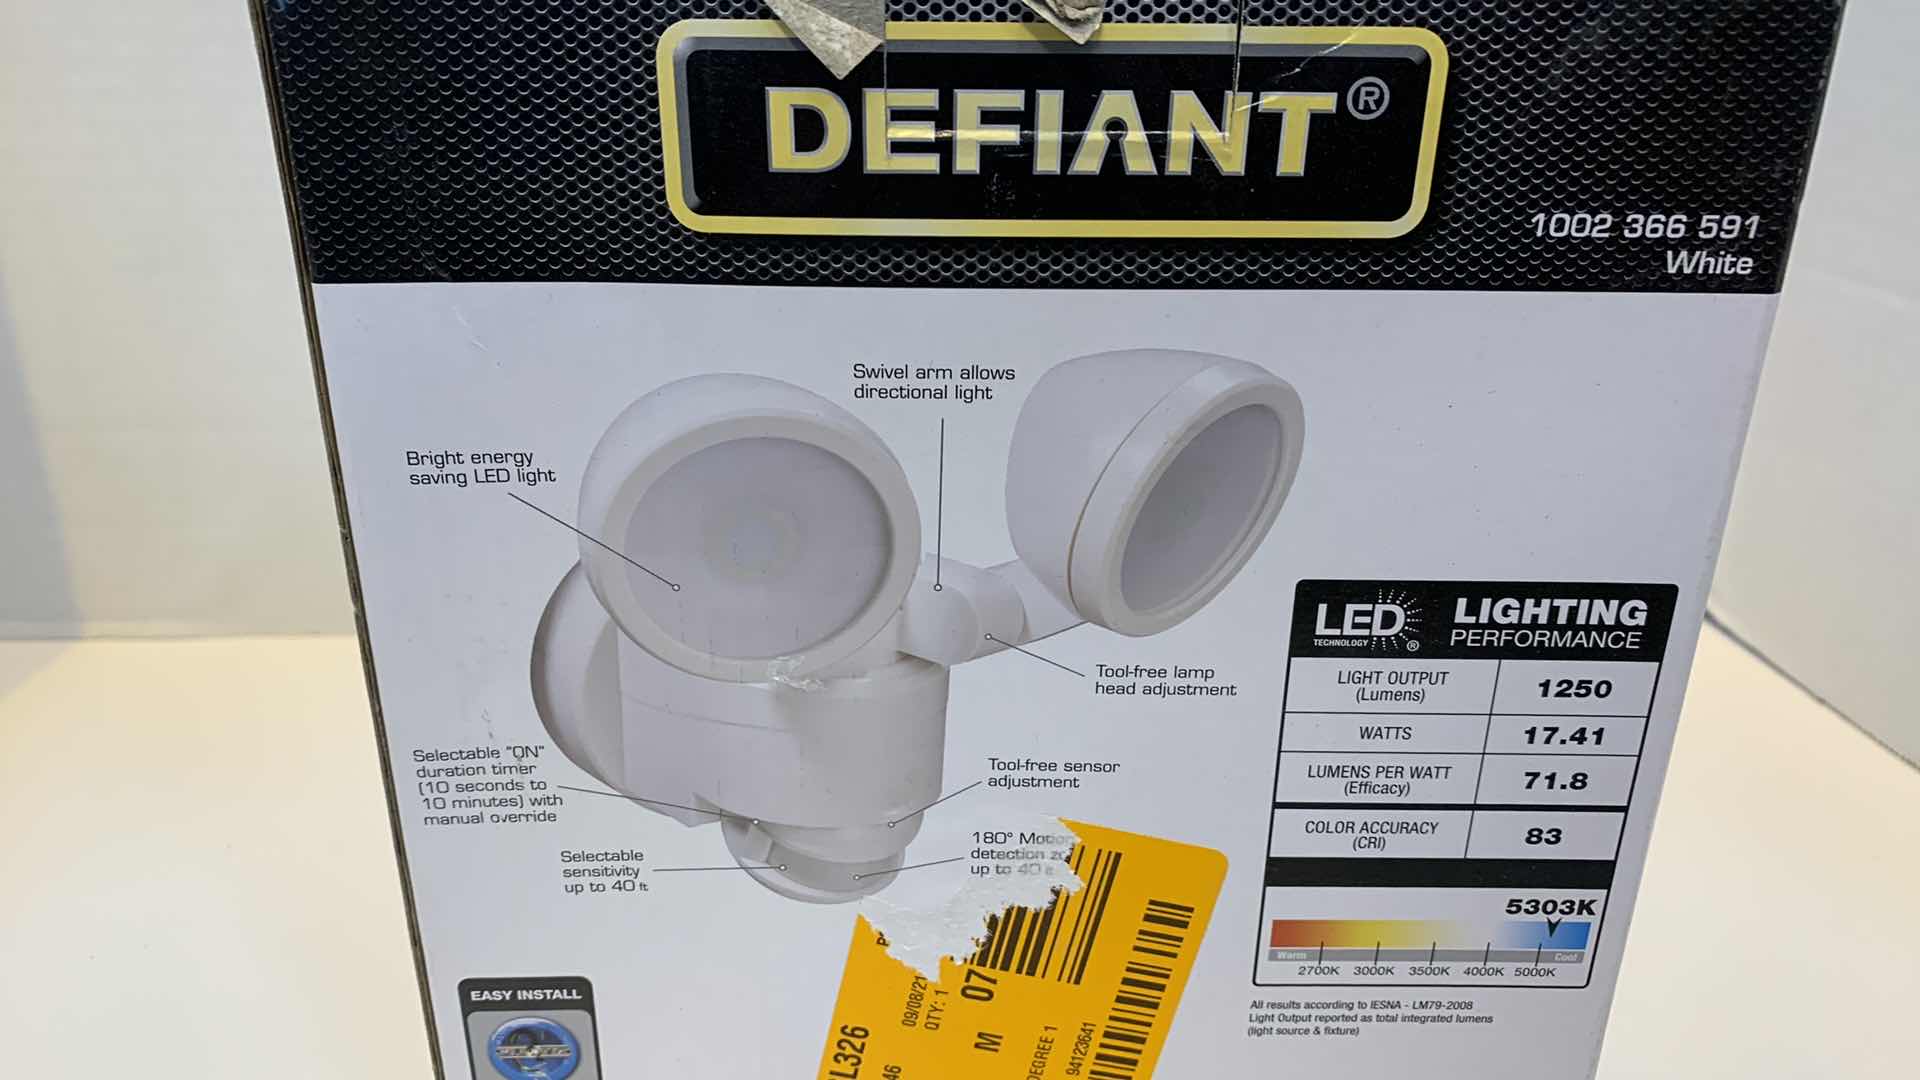 Photo 2 of DEFIANT MOTION ACTIVATED SECURITY LIGHT WIRED 1002 366 591